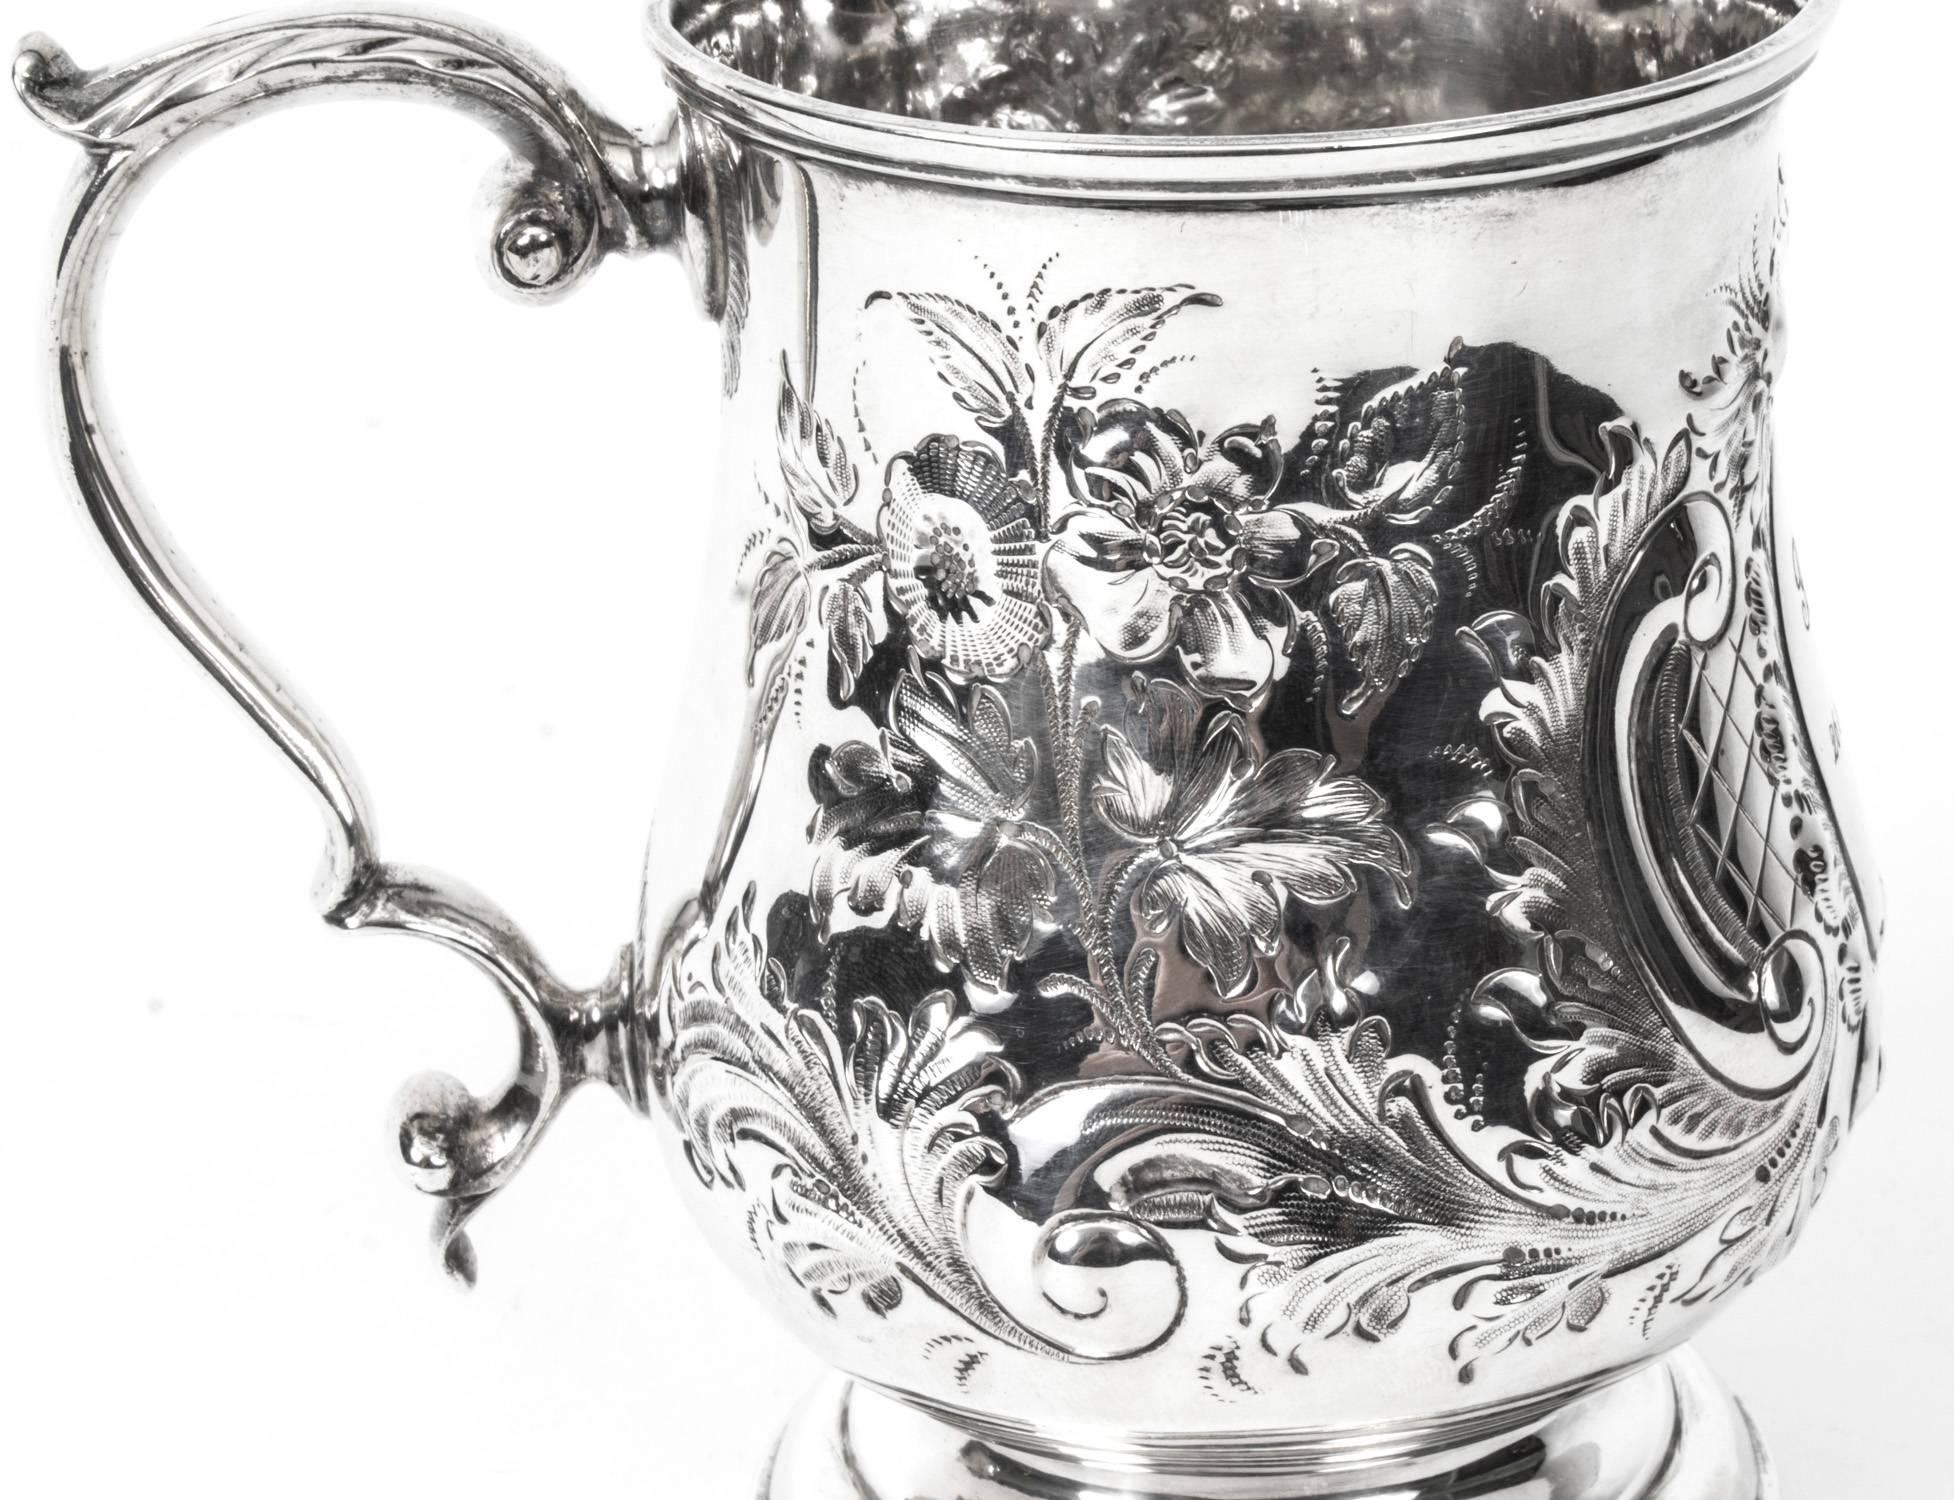 English 19th Century Victorian Silver Plated Embossed and Engraved Mug